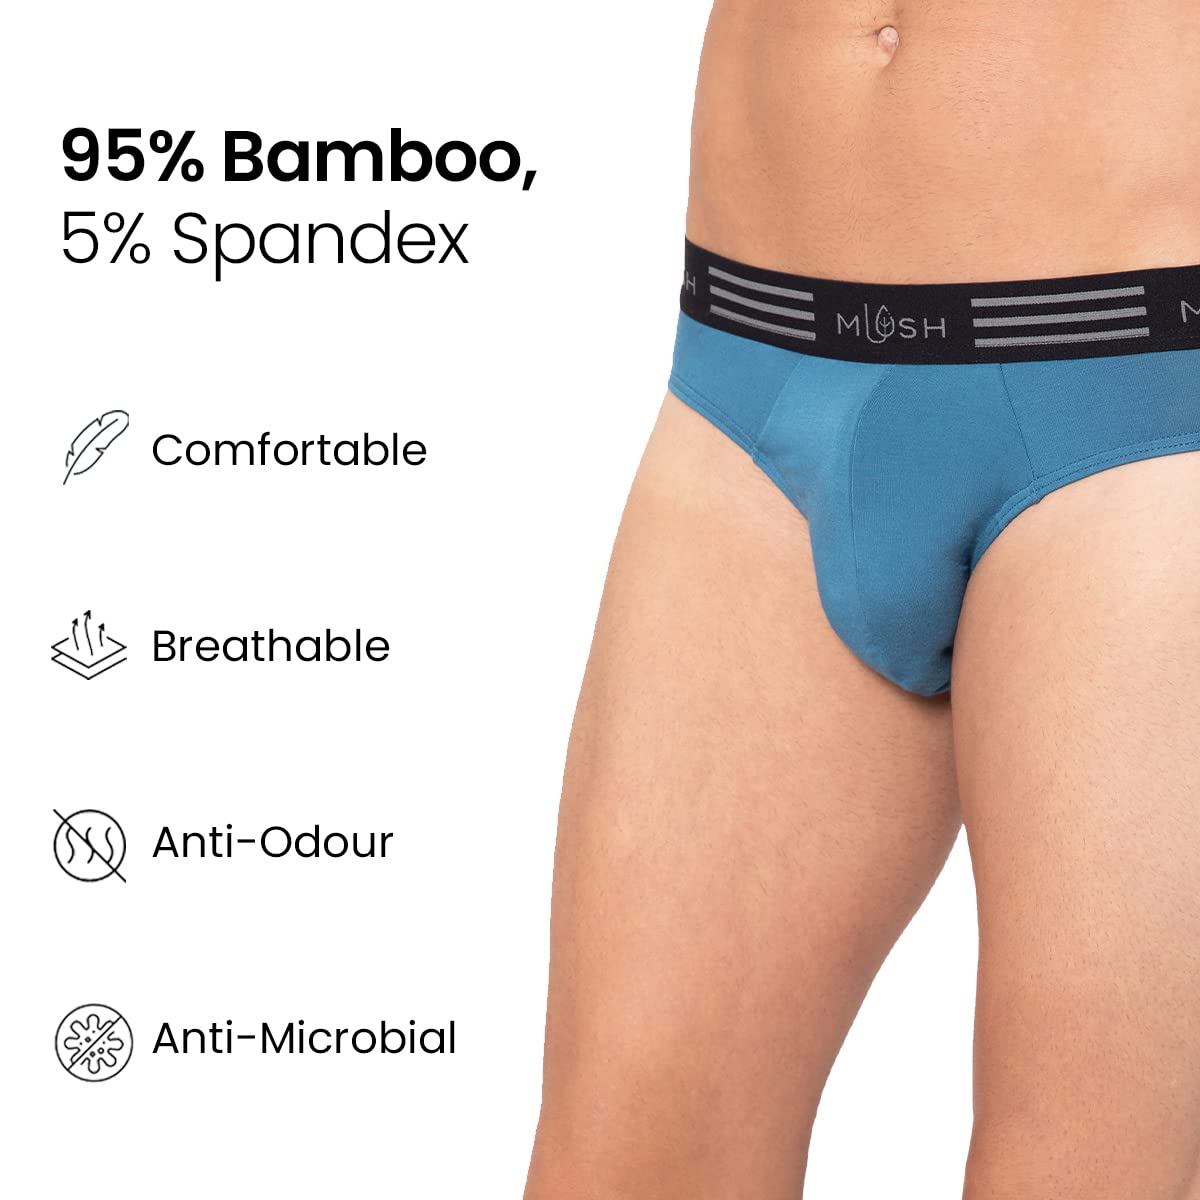 Mush Ultra Soft, Breathable, Feather Light Men's Bamboo Brief || Naturally Anti-Odor and Anti-Microbial Bamboo Innerwear Pack of 3 (XL, Blue)